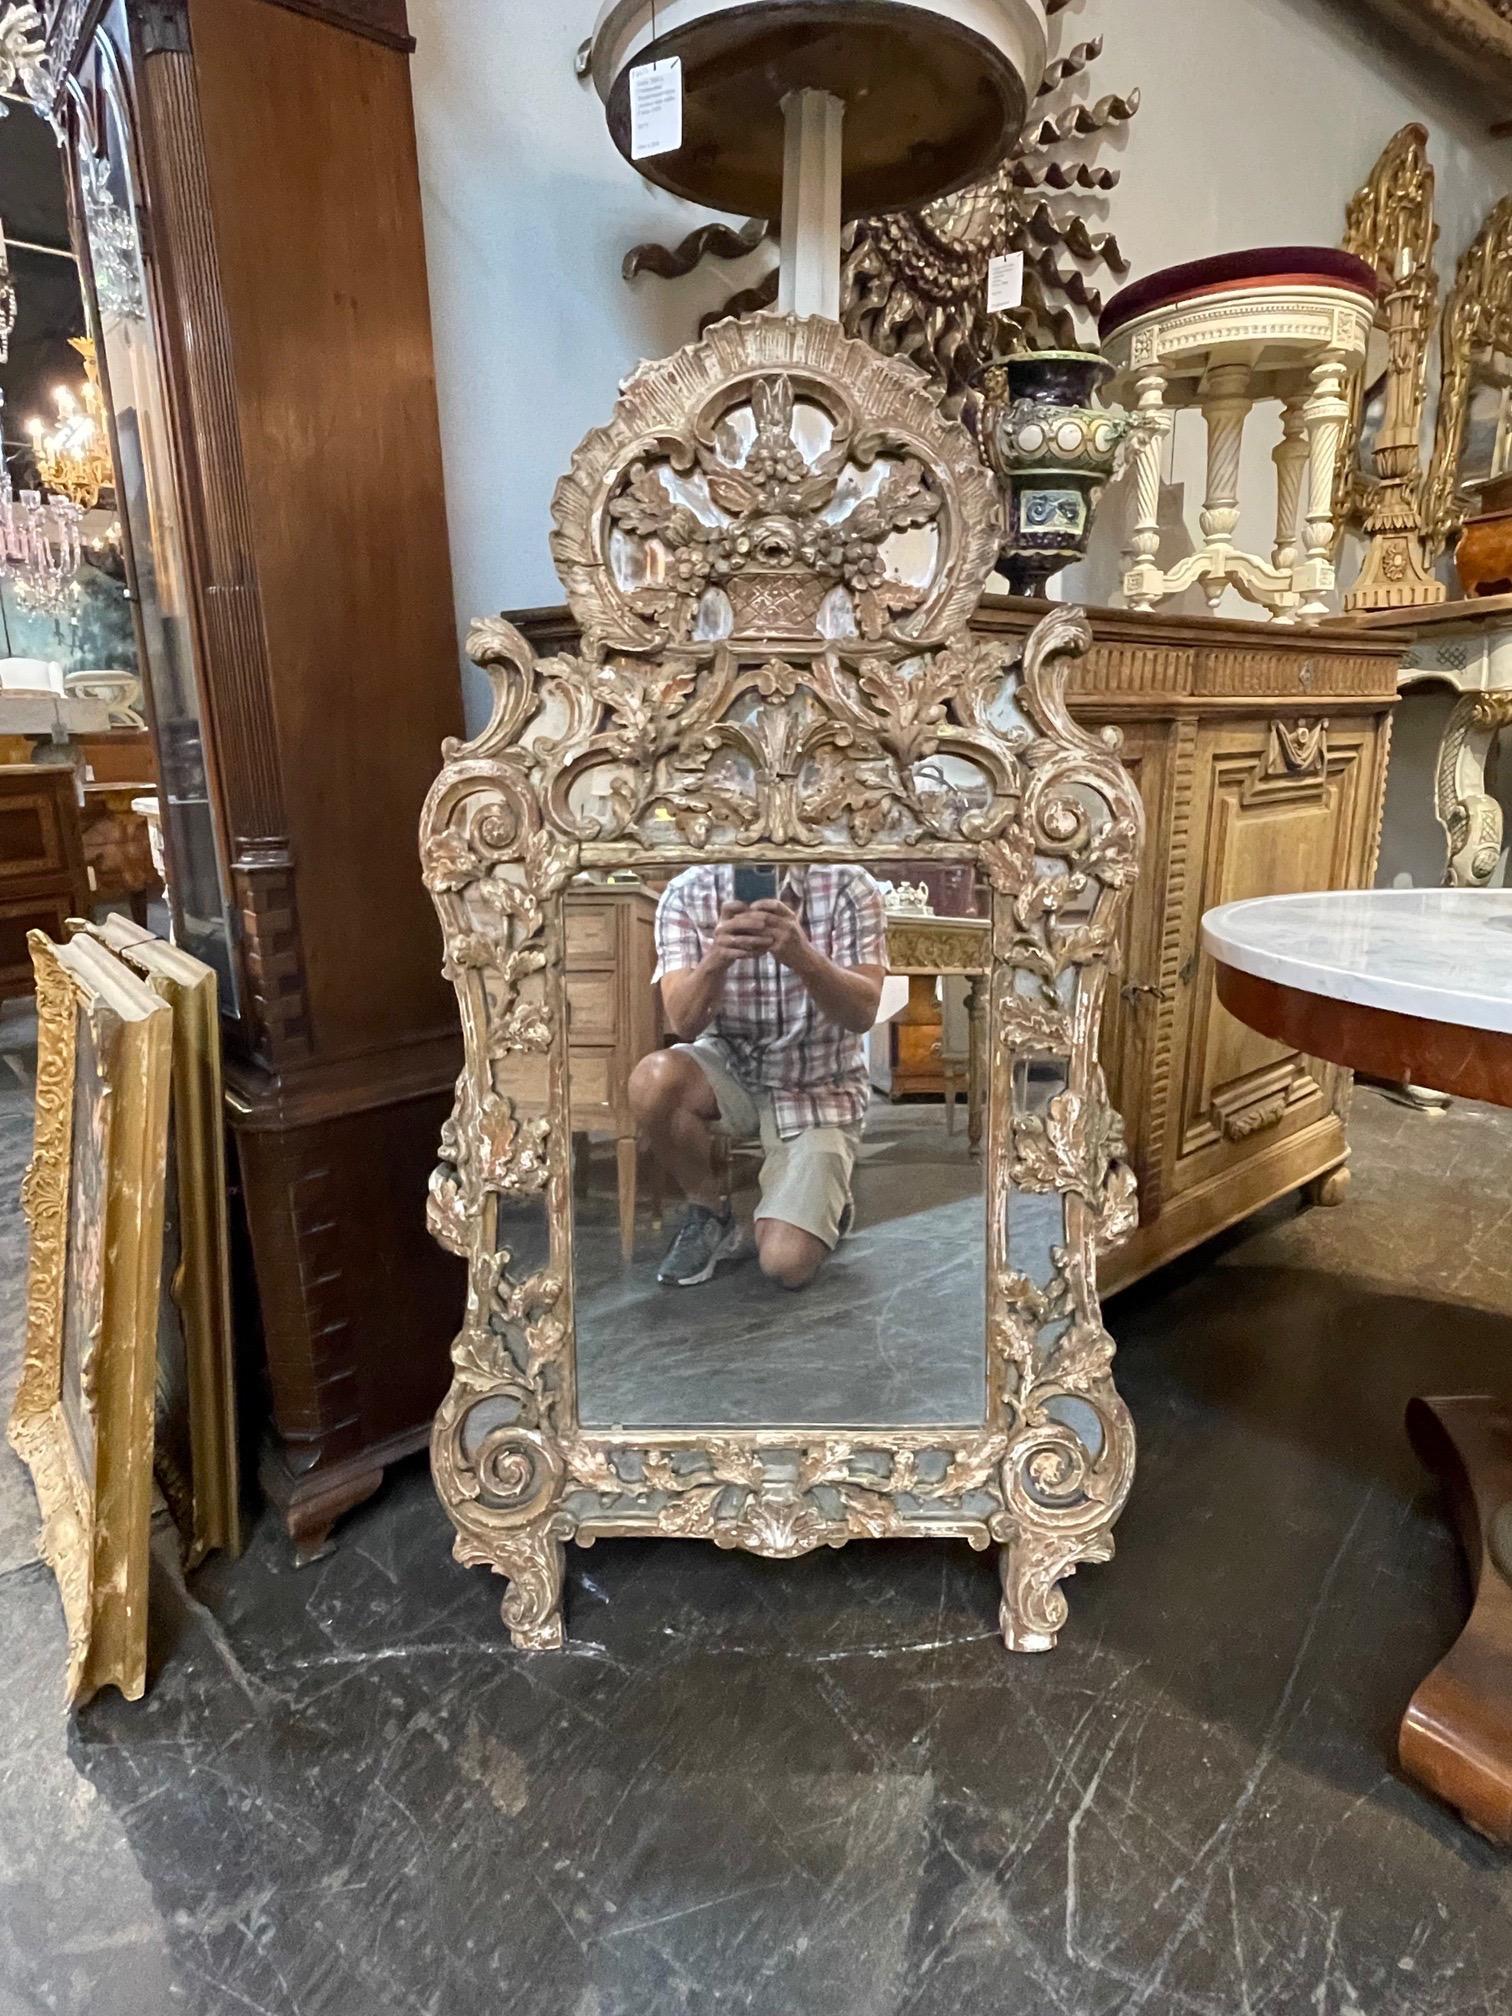 Exceptional 18th century French carved mirror. Very fine carvings on this piece and great patina as well. Gorgeous!!